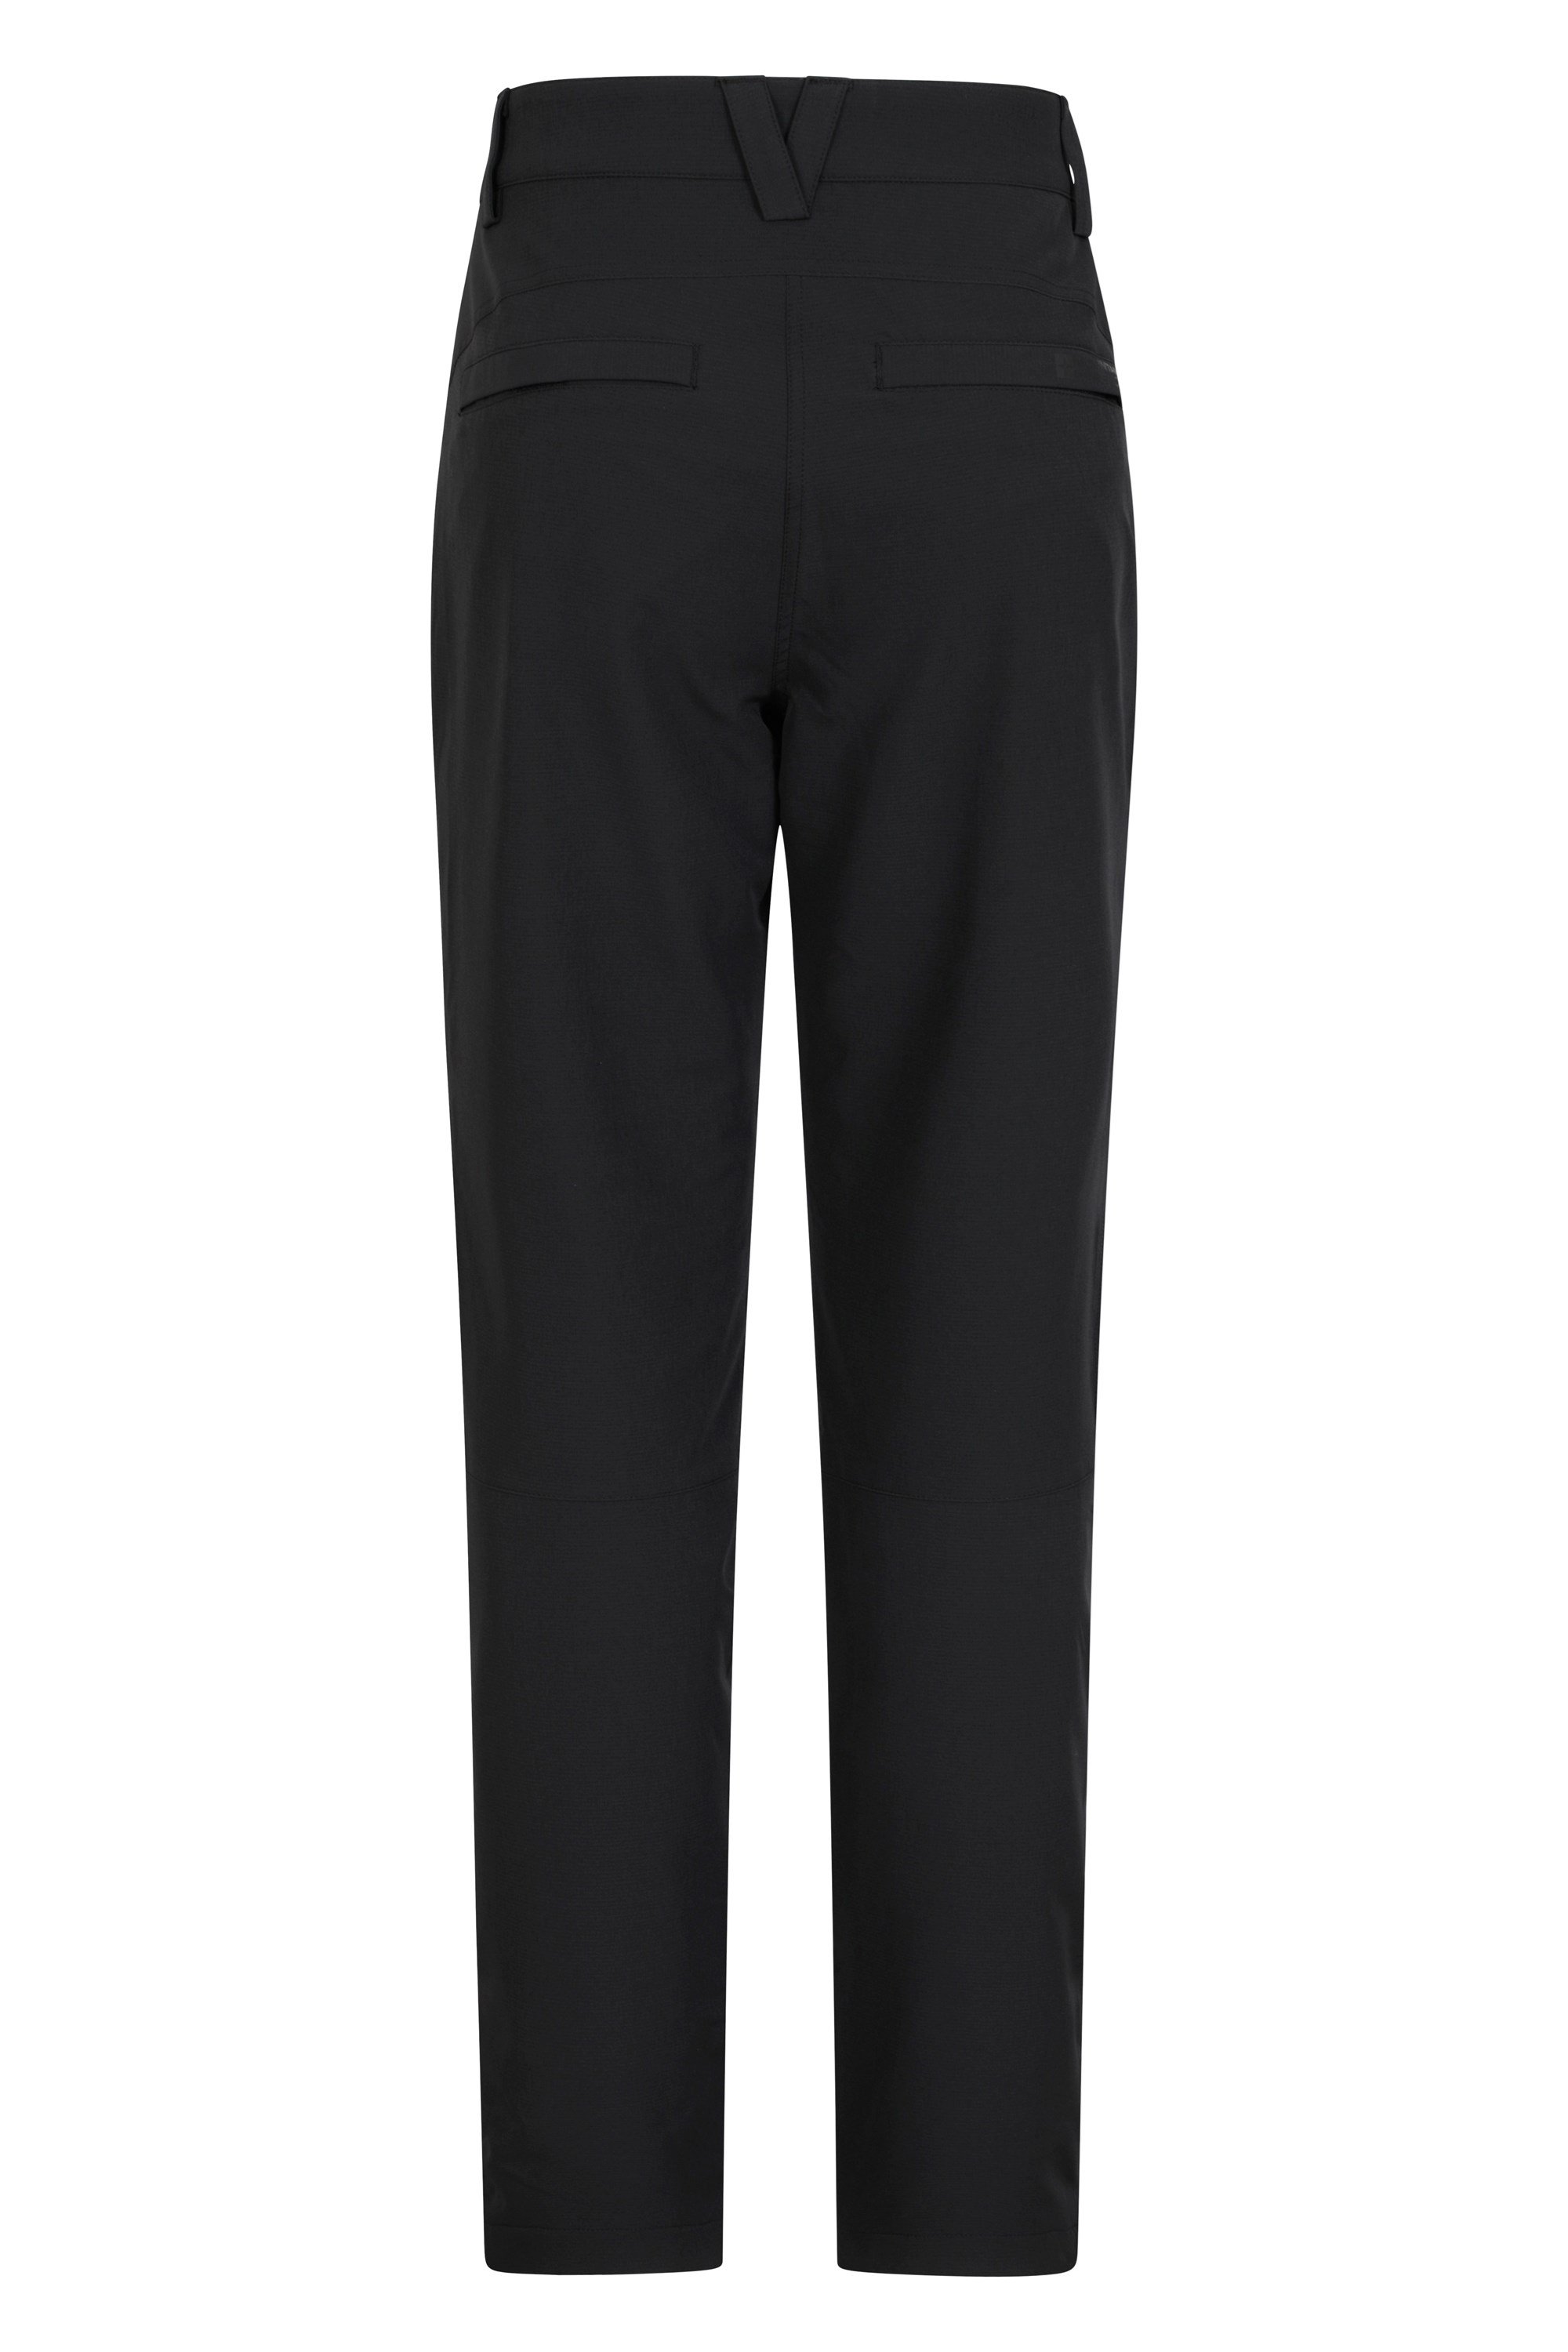 ZFLY Winter Ladies Warm Thick Lined Trousers with Fleece Lining